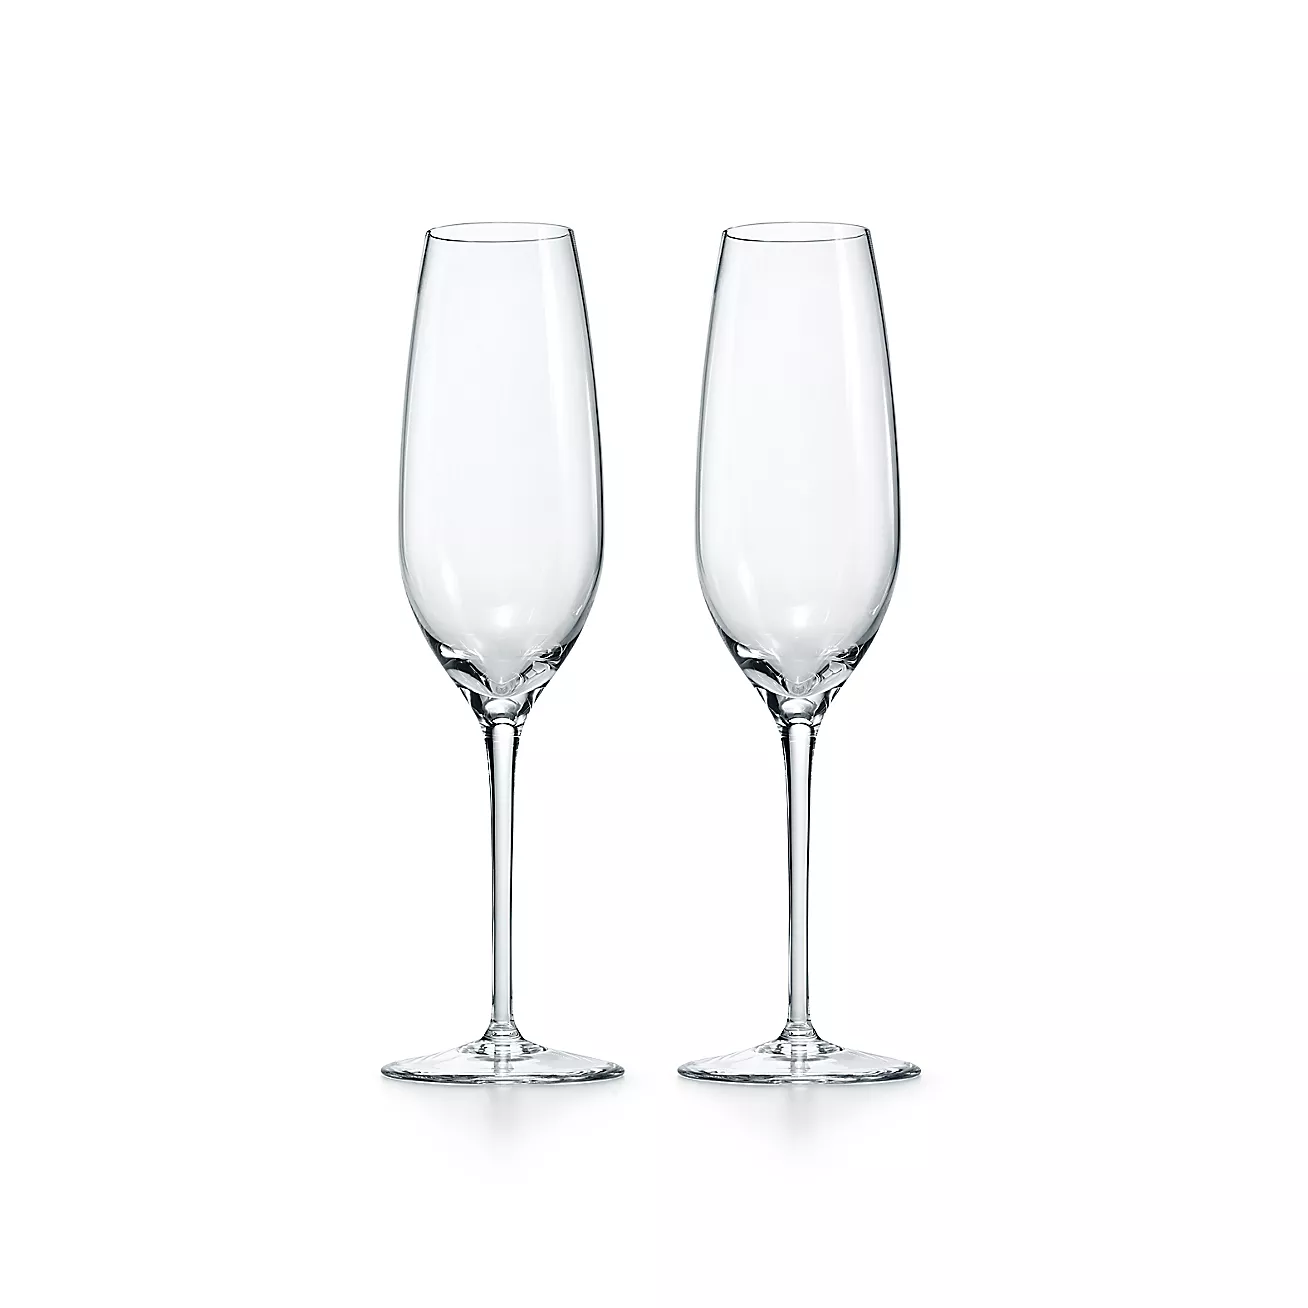 Tiffany Home Essentials Pinot Noir Glasses in Crystal Glass, Set